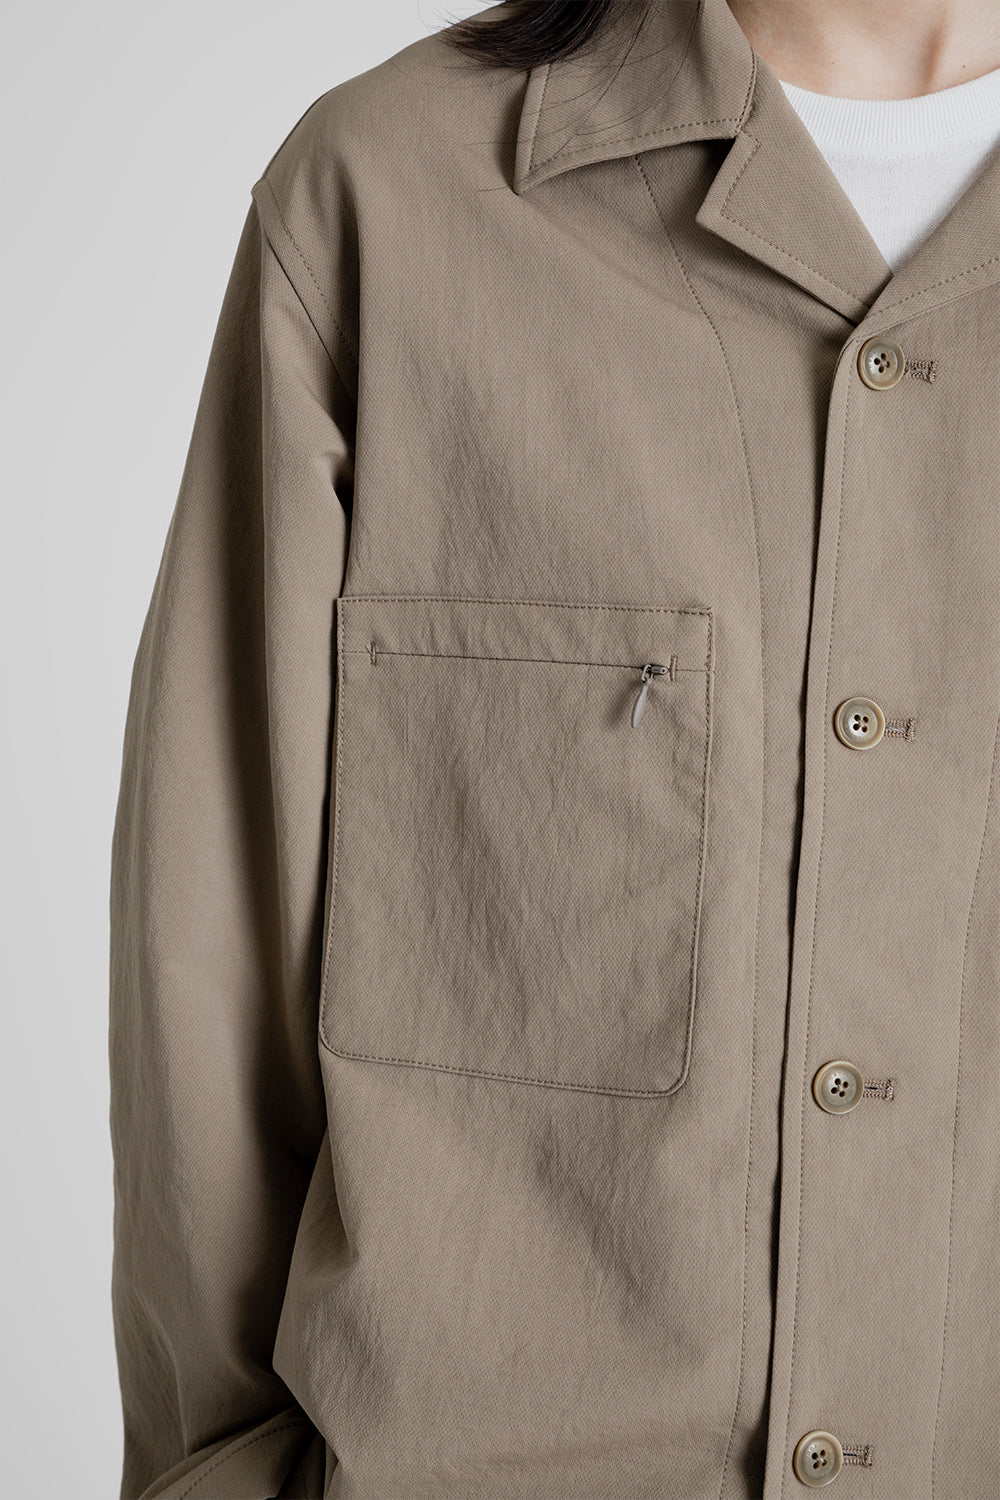 Nanamica Alphadry Shirt Jacket in Taupe